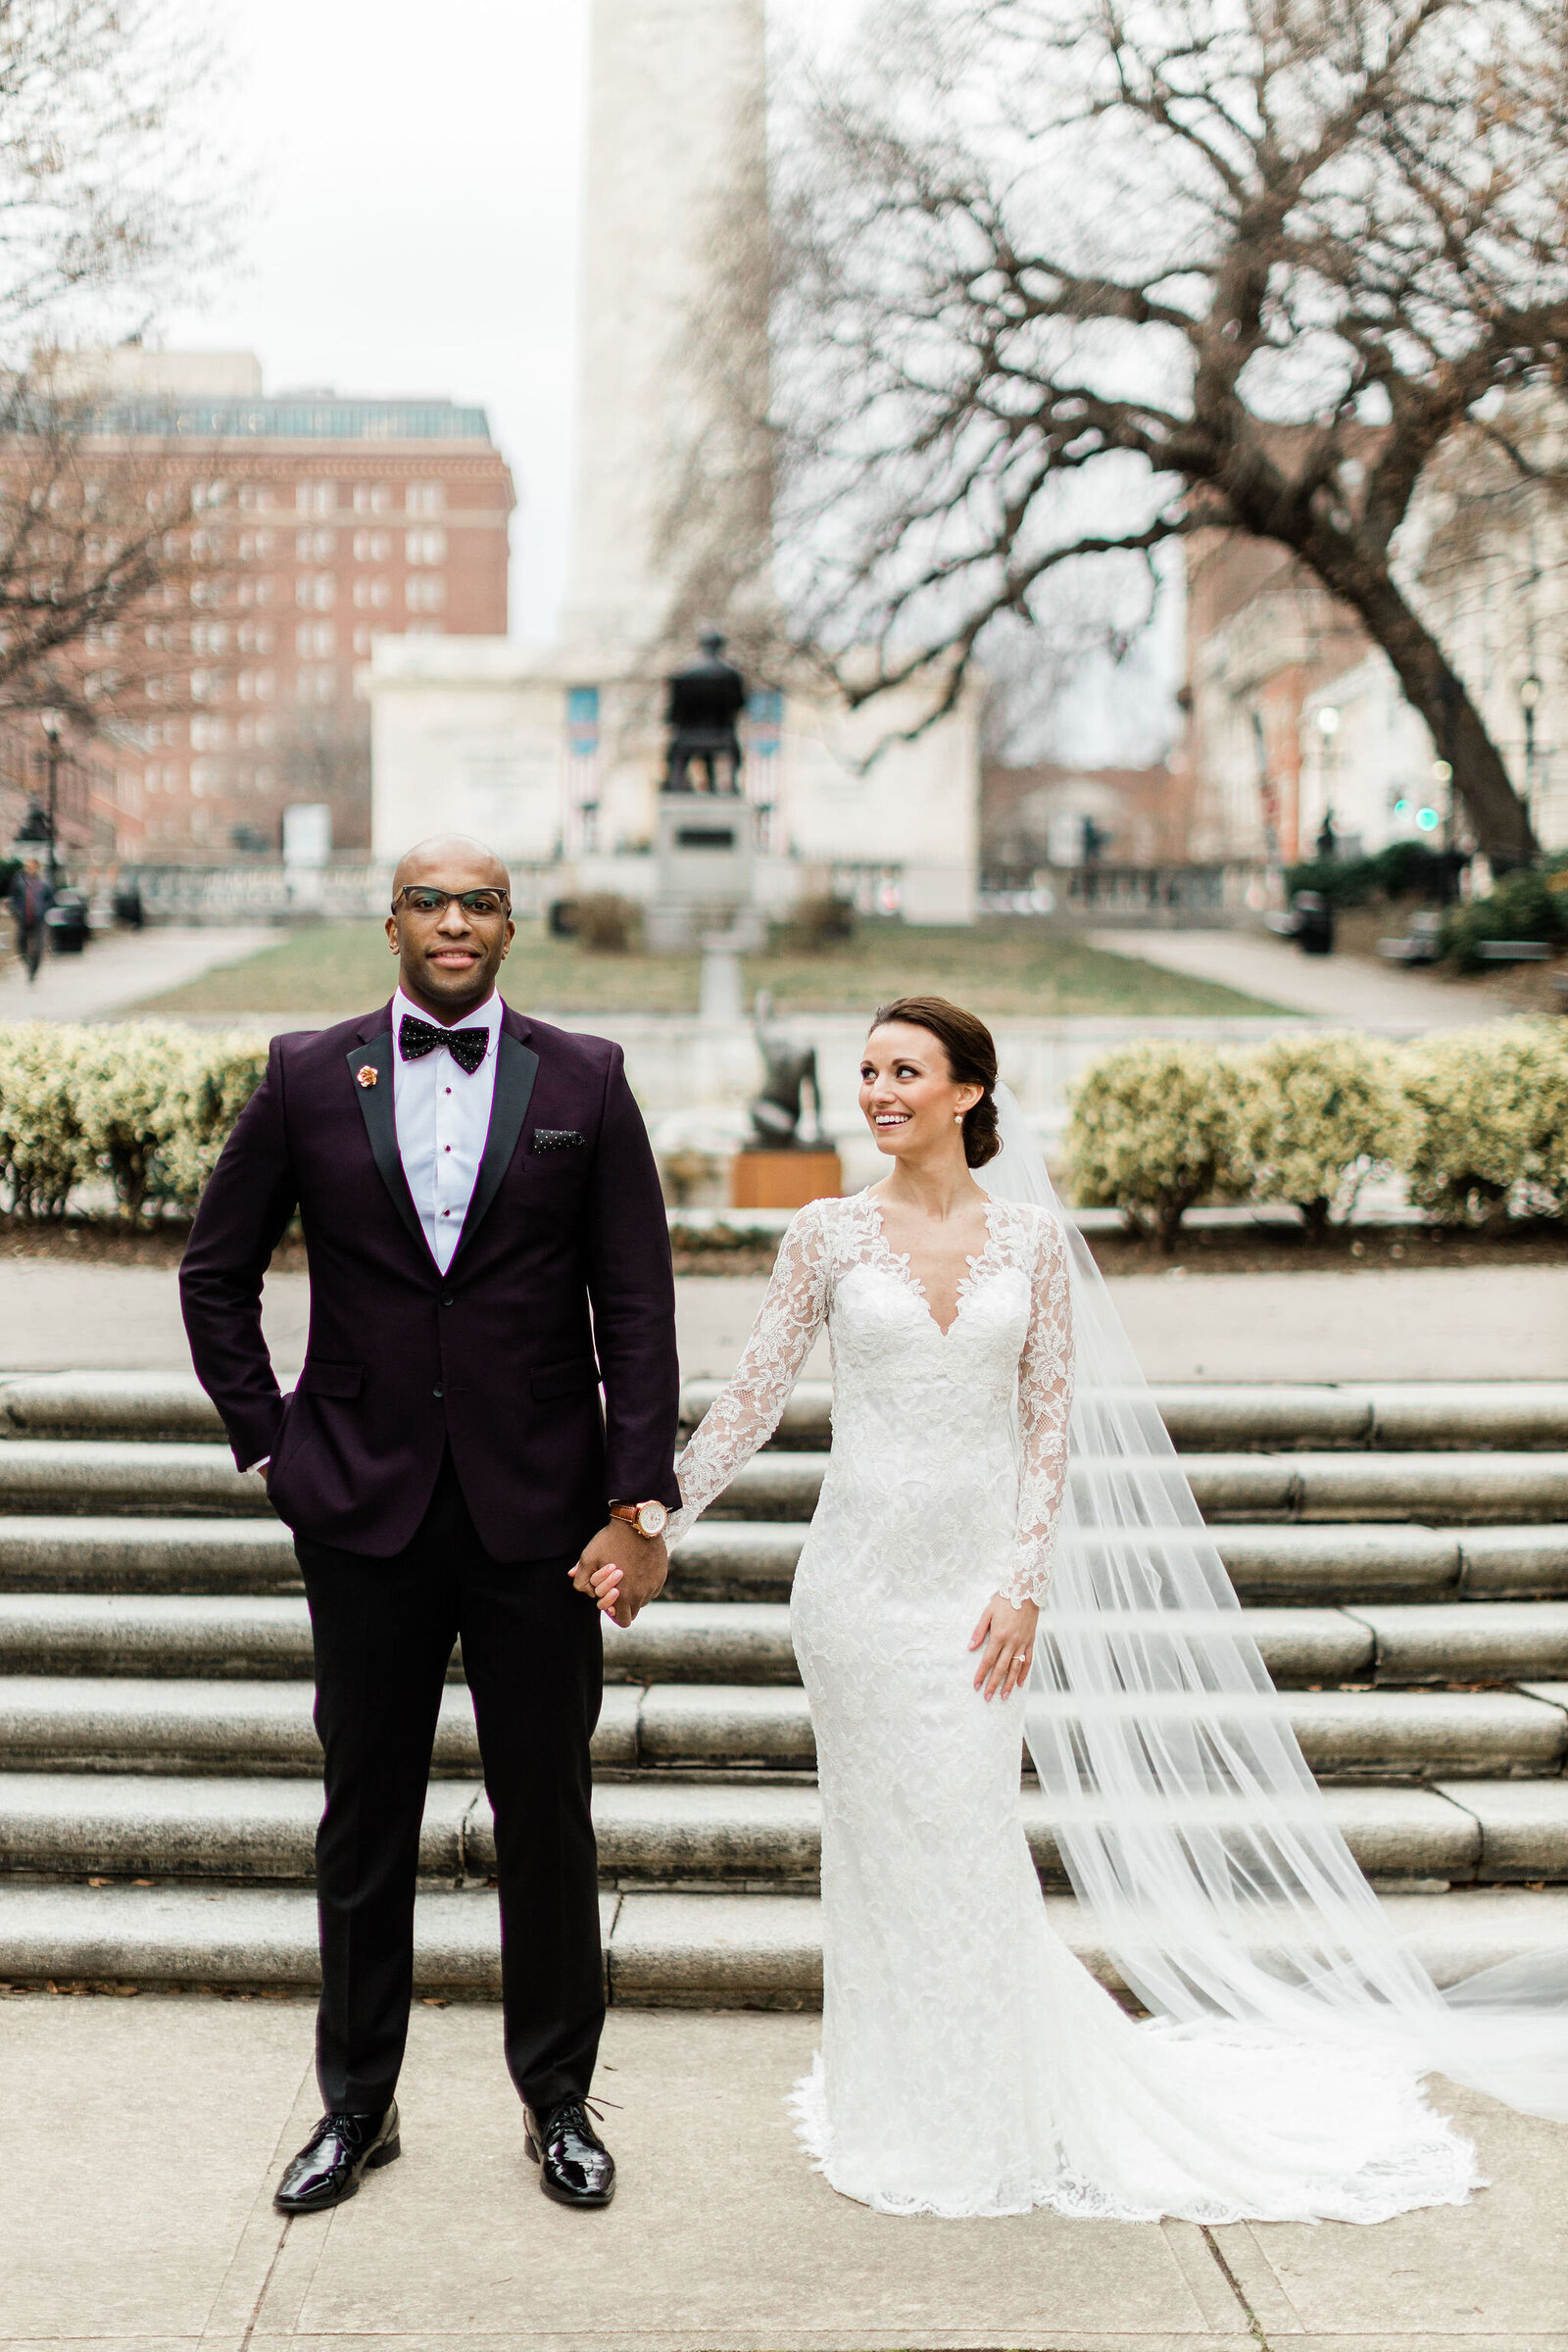 Bride and Groom Formal Photos | The Peabody Library Baltimore MD | The Axtells Photo and Film